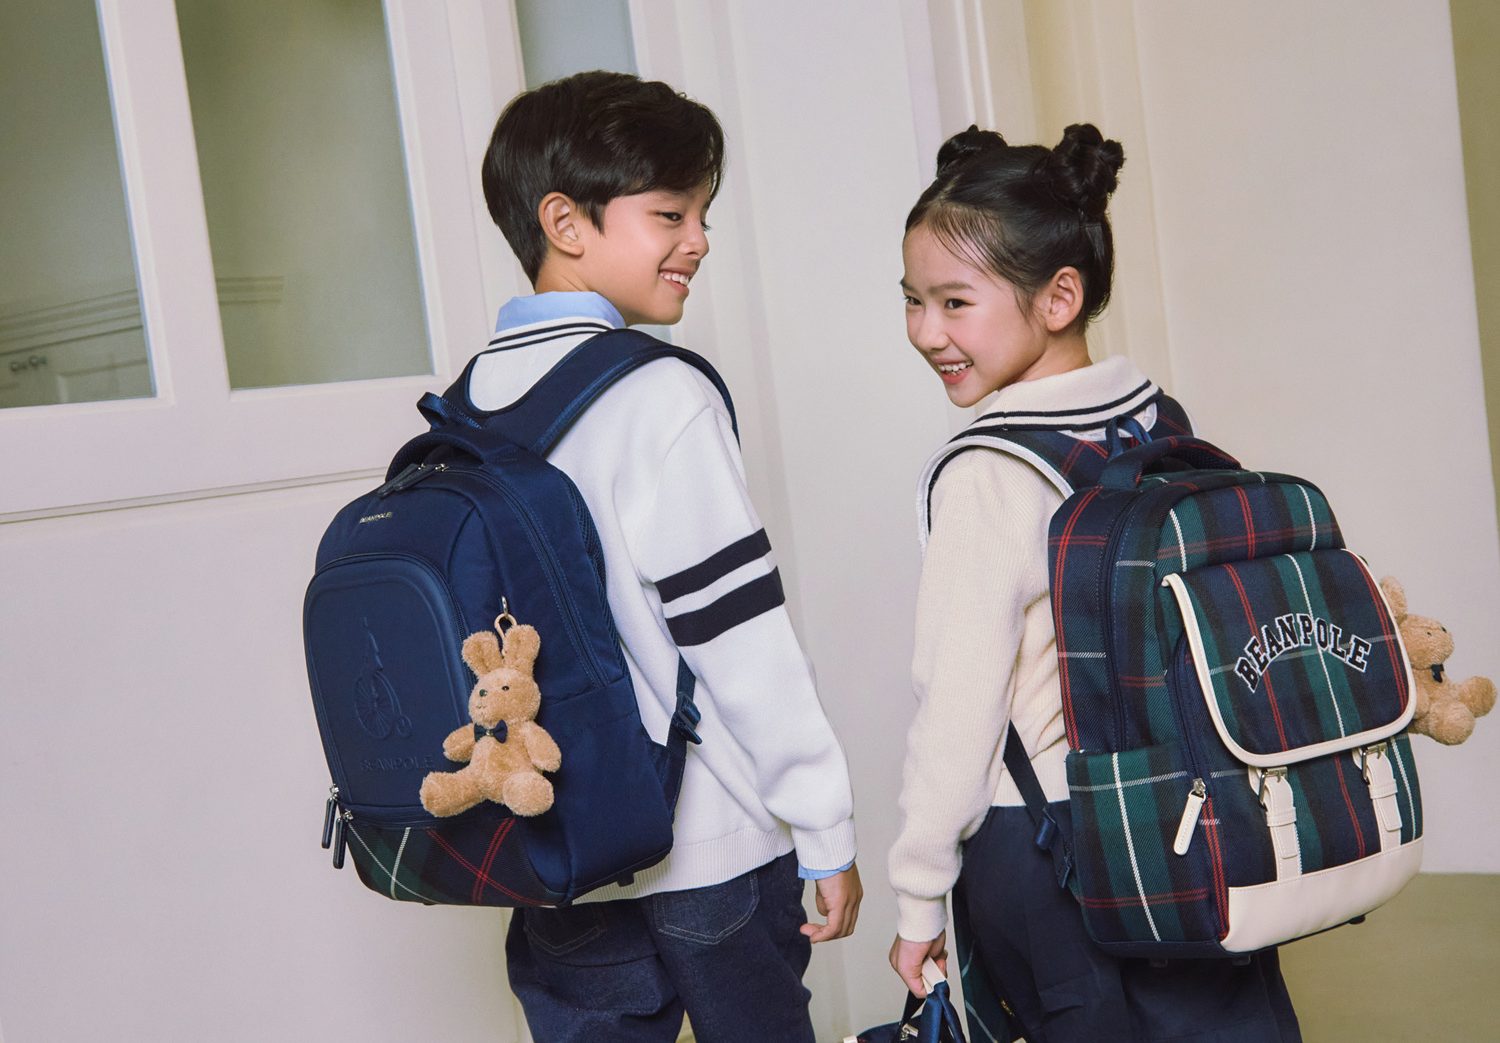 Send your kids off to school with the right kind of bag to suit them.